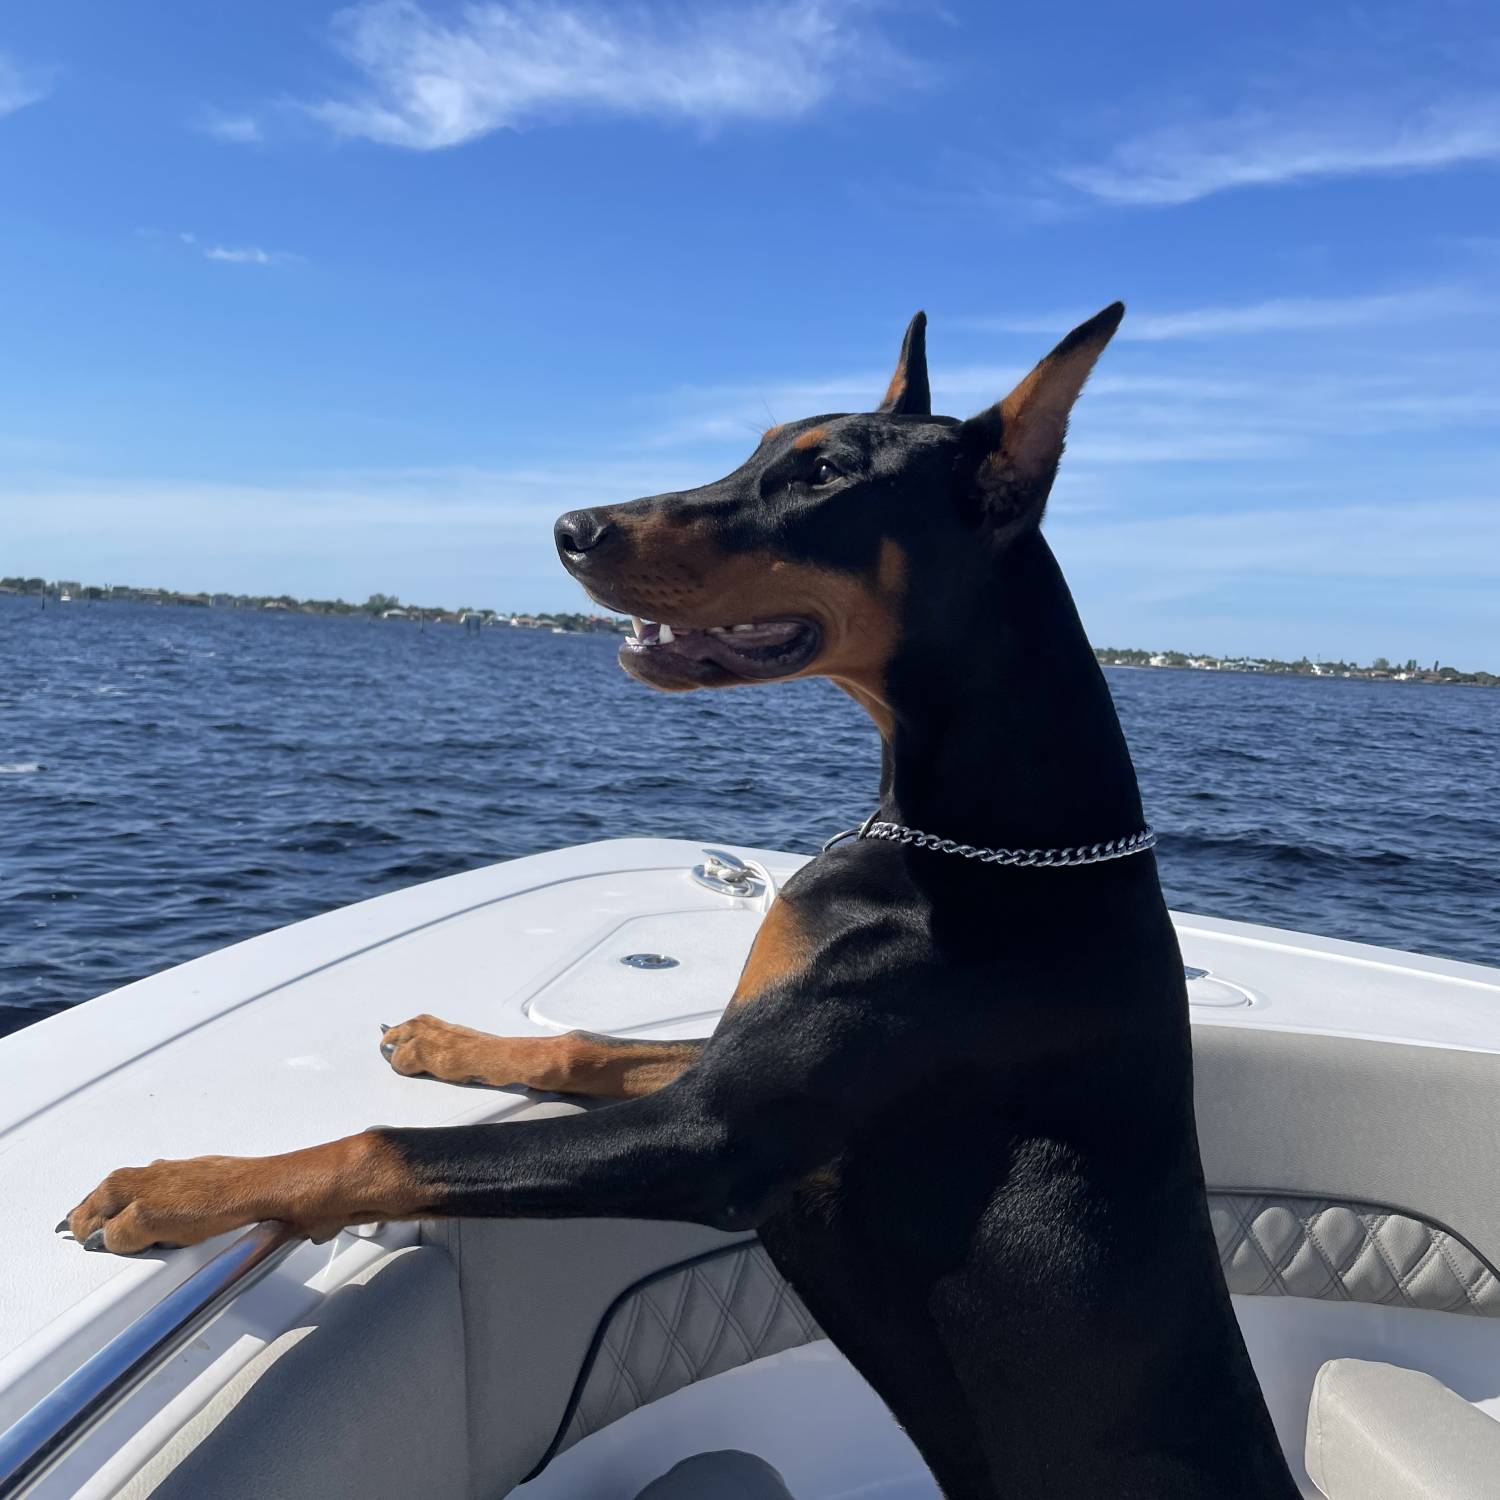 Title: Vader - On board their Sportsman Open 282 Center Console - Location: Fort myers Florida. Participating in the Photo Contest #SportsmanSeptember